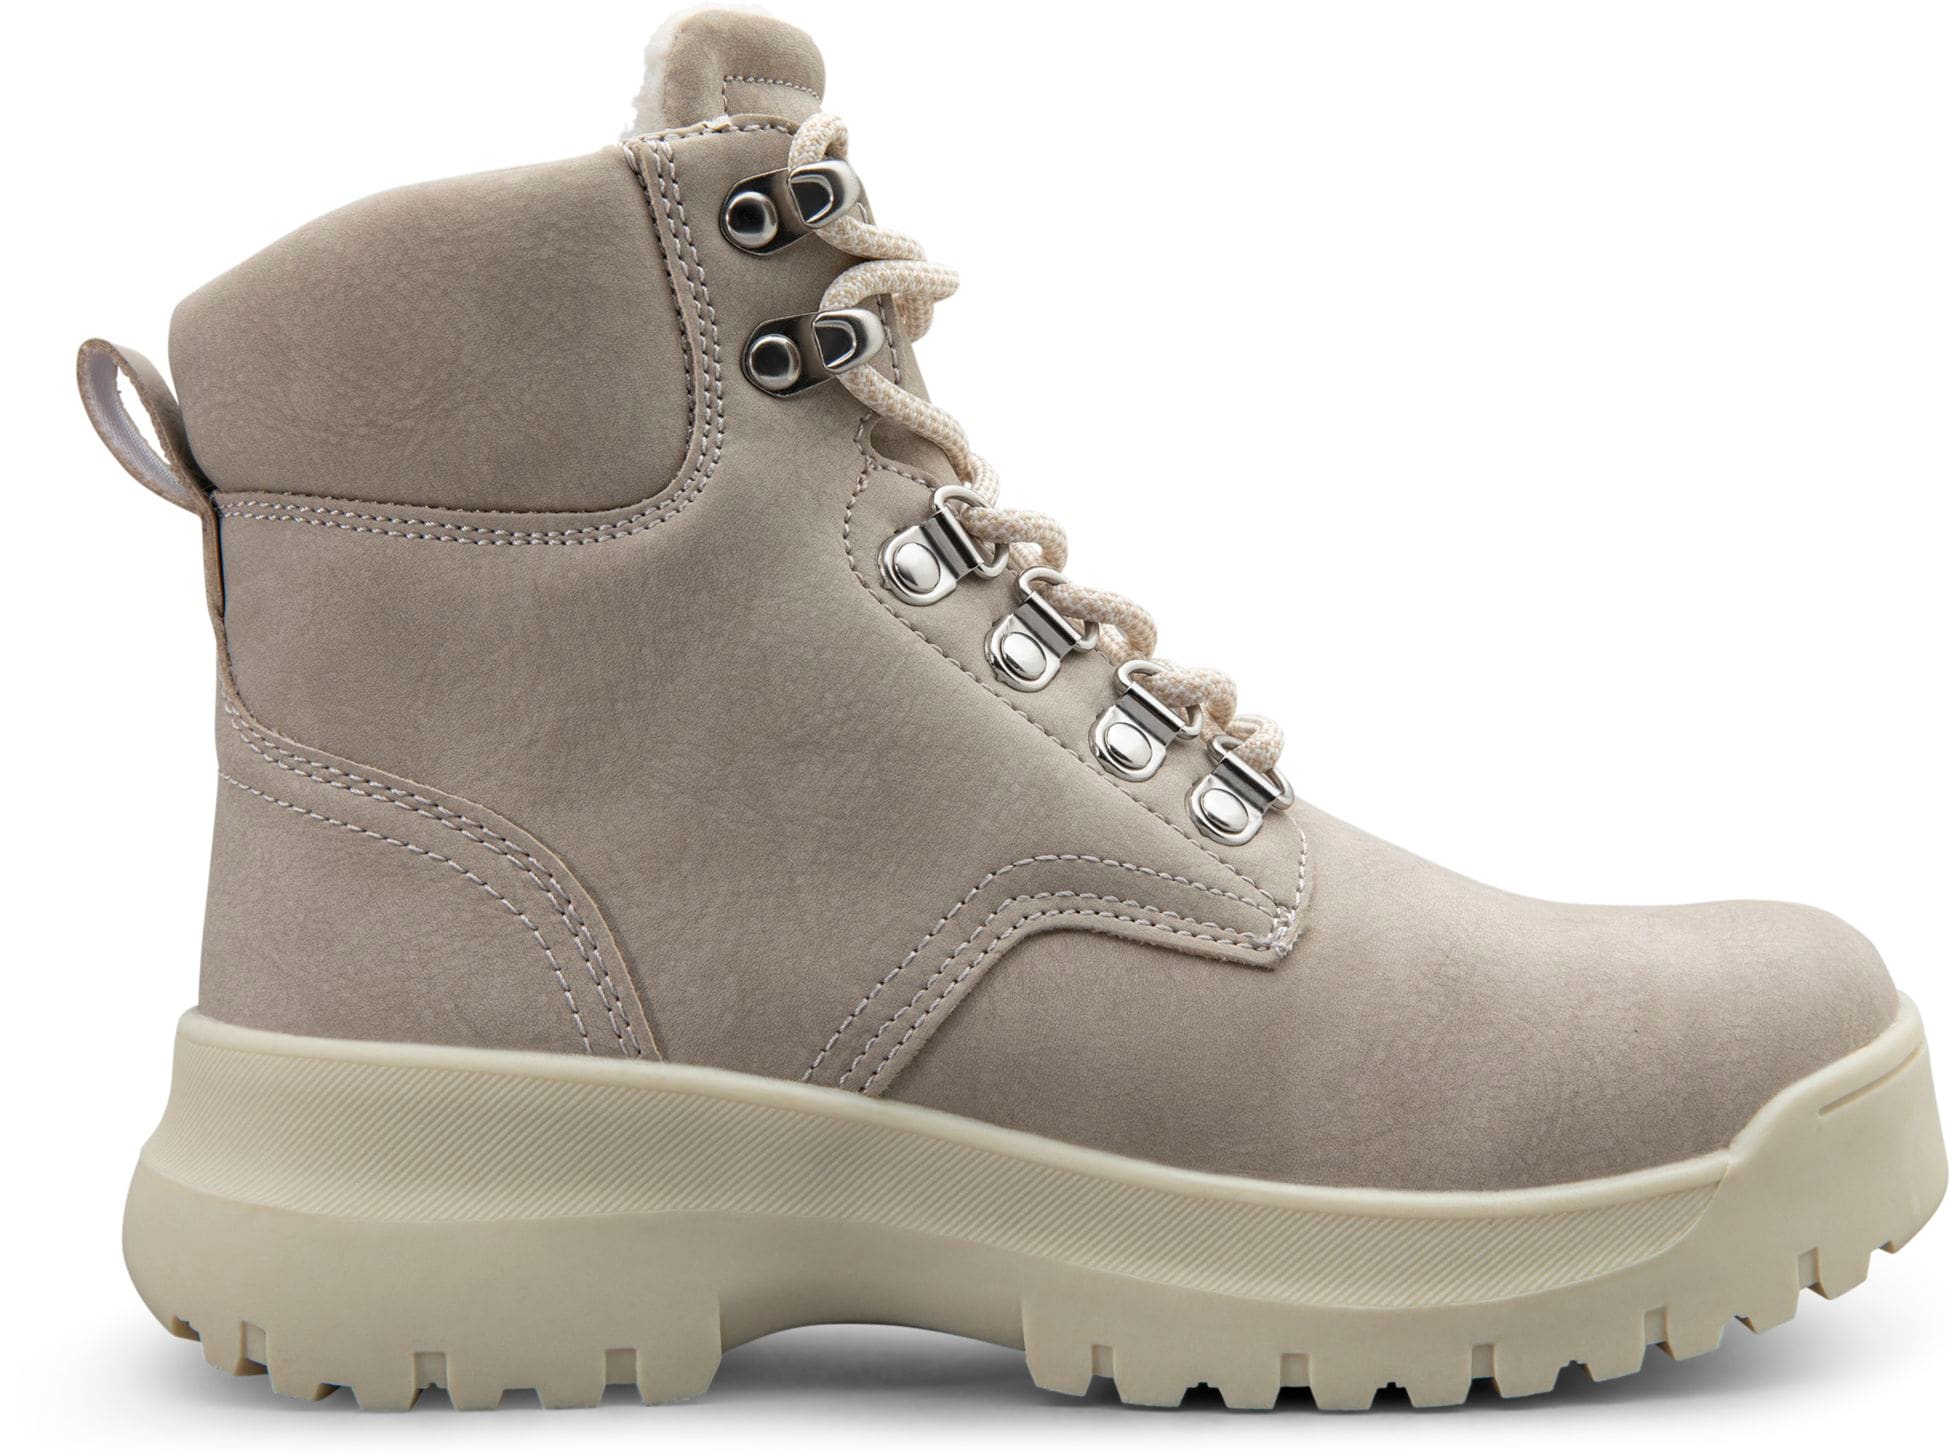 EVEREST, J LACE BOOT